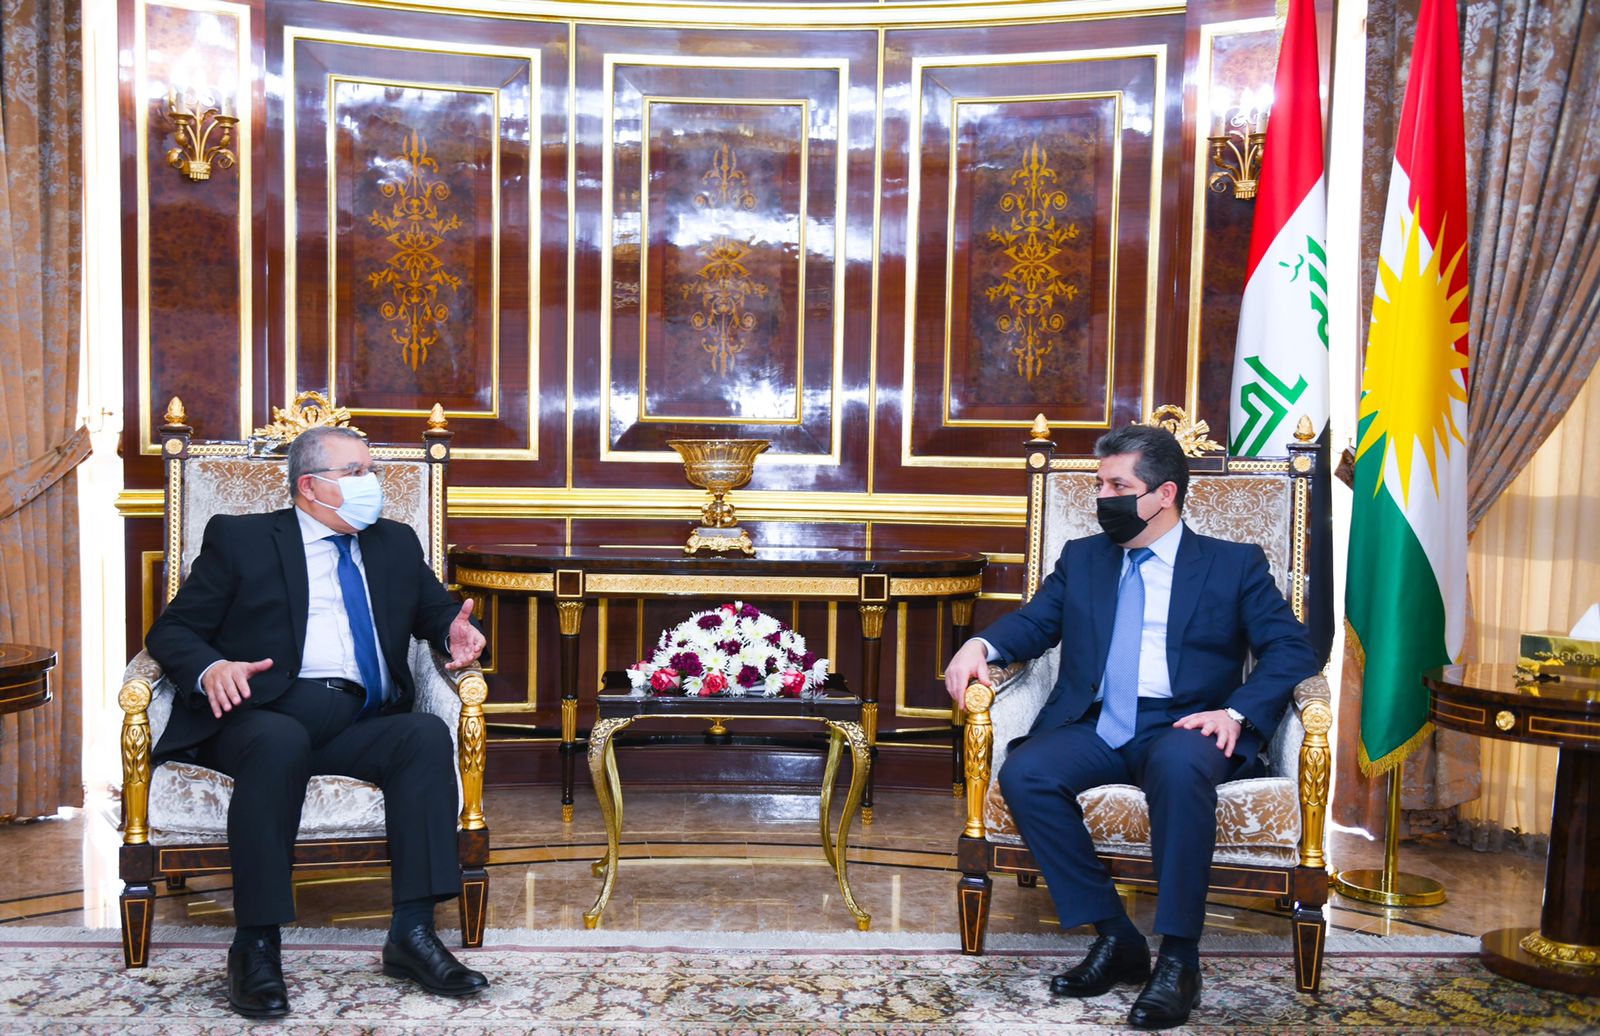 IRCS praises KRG's efforts to host displaced people and refugees